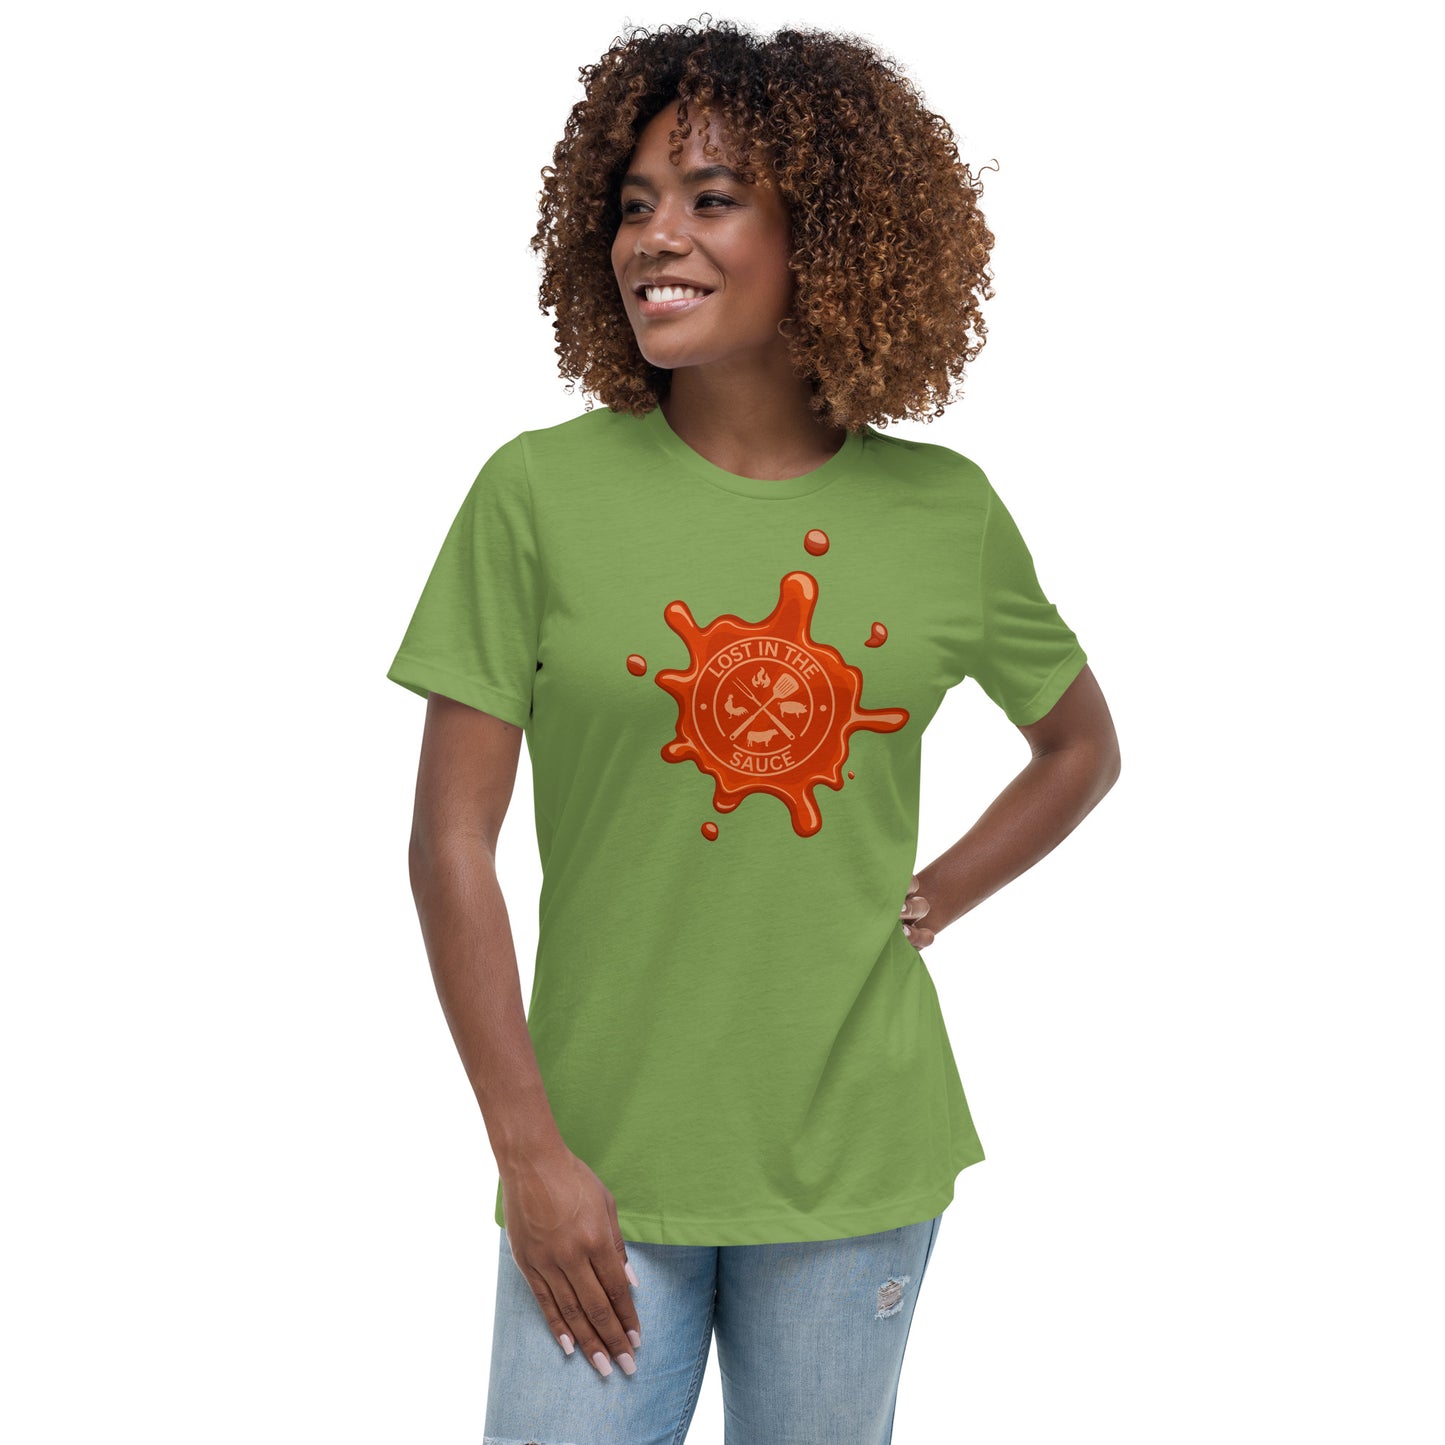 LOST IN THE SAUCE (BBQ) Women's Relaxed T-Shirt